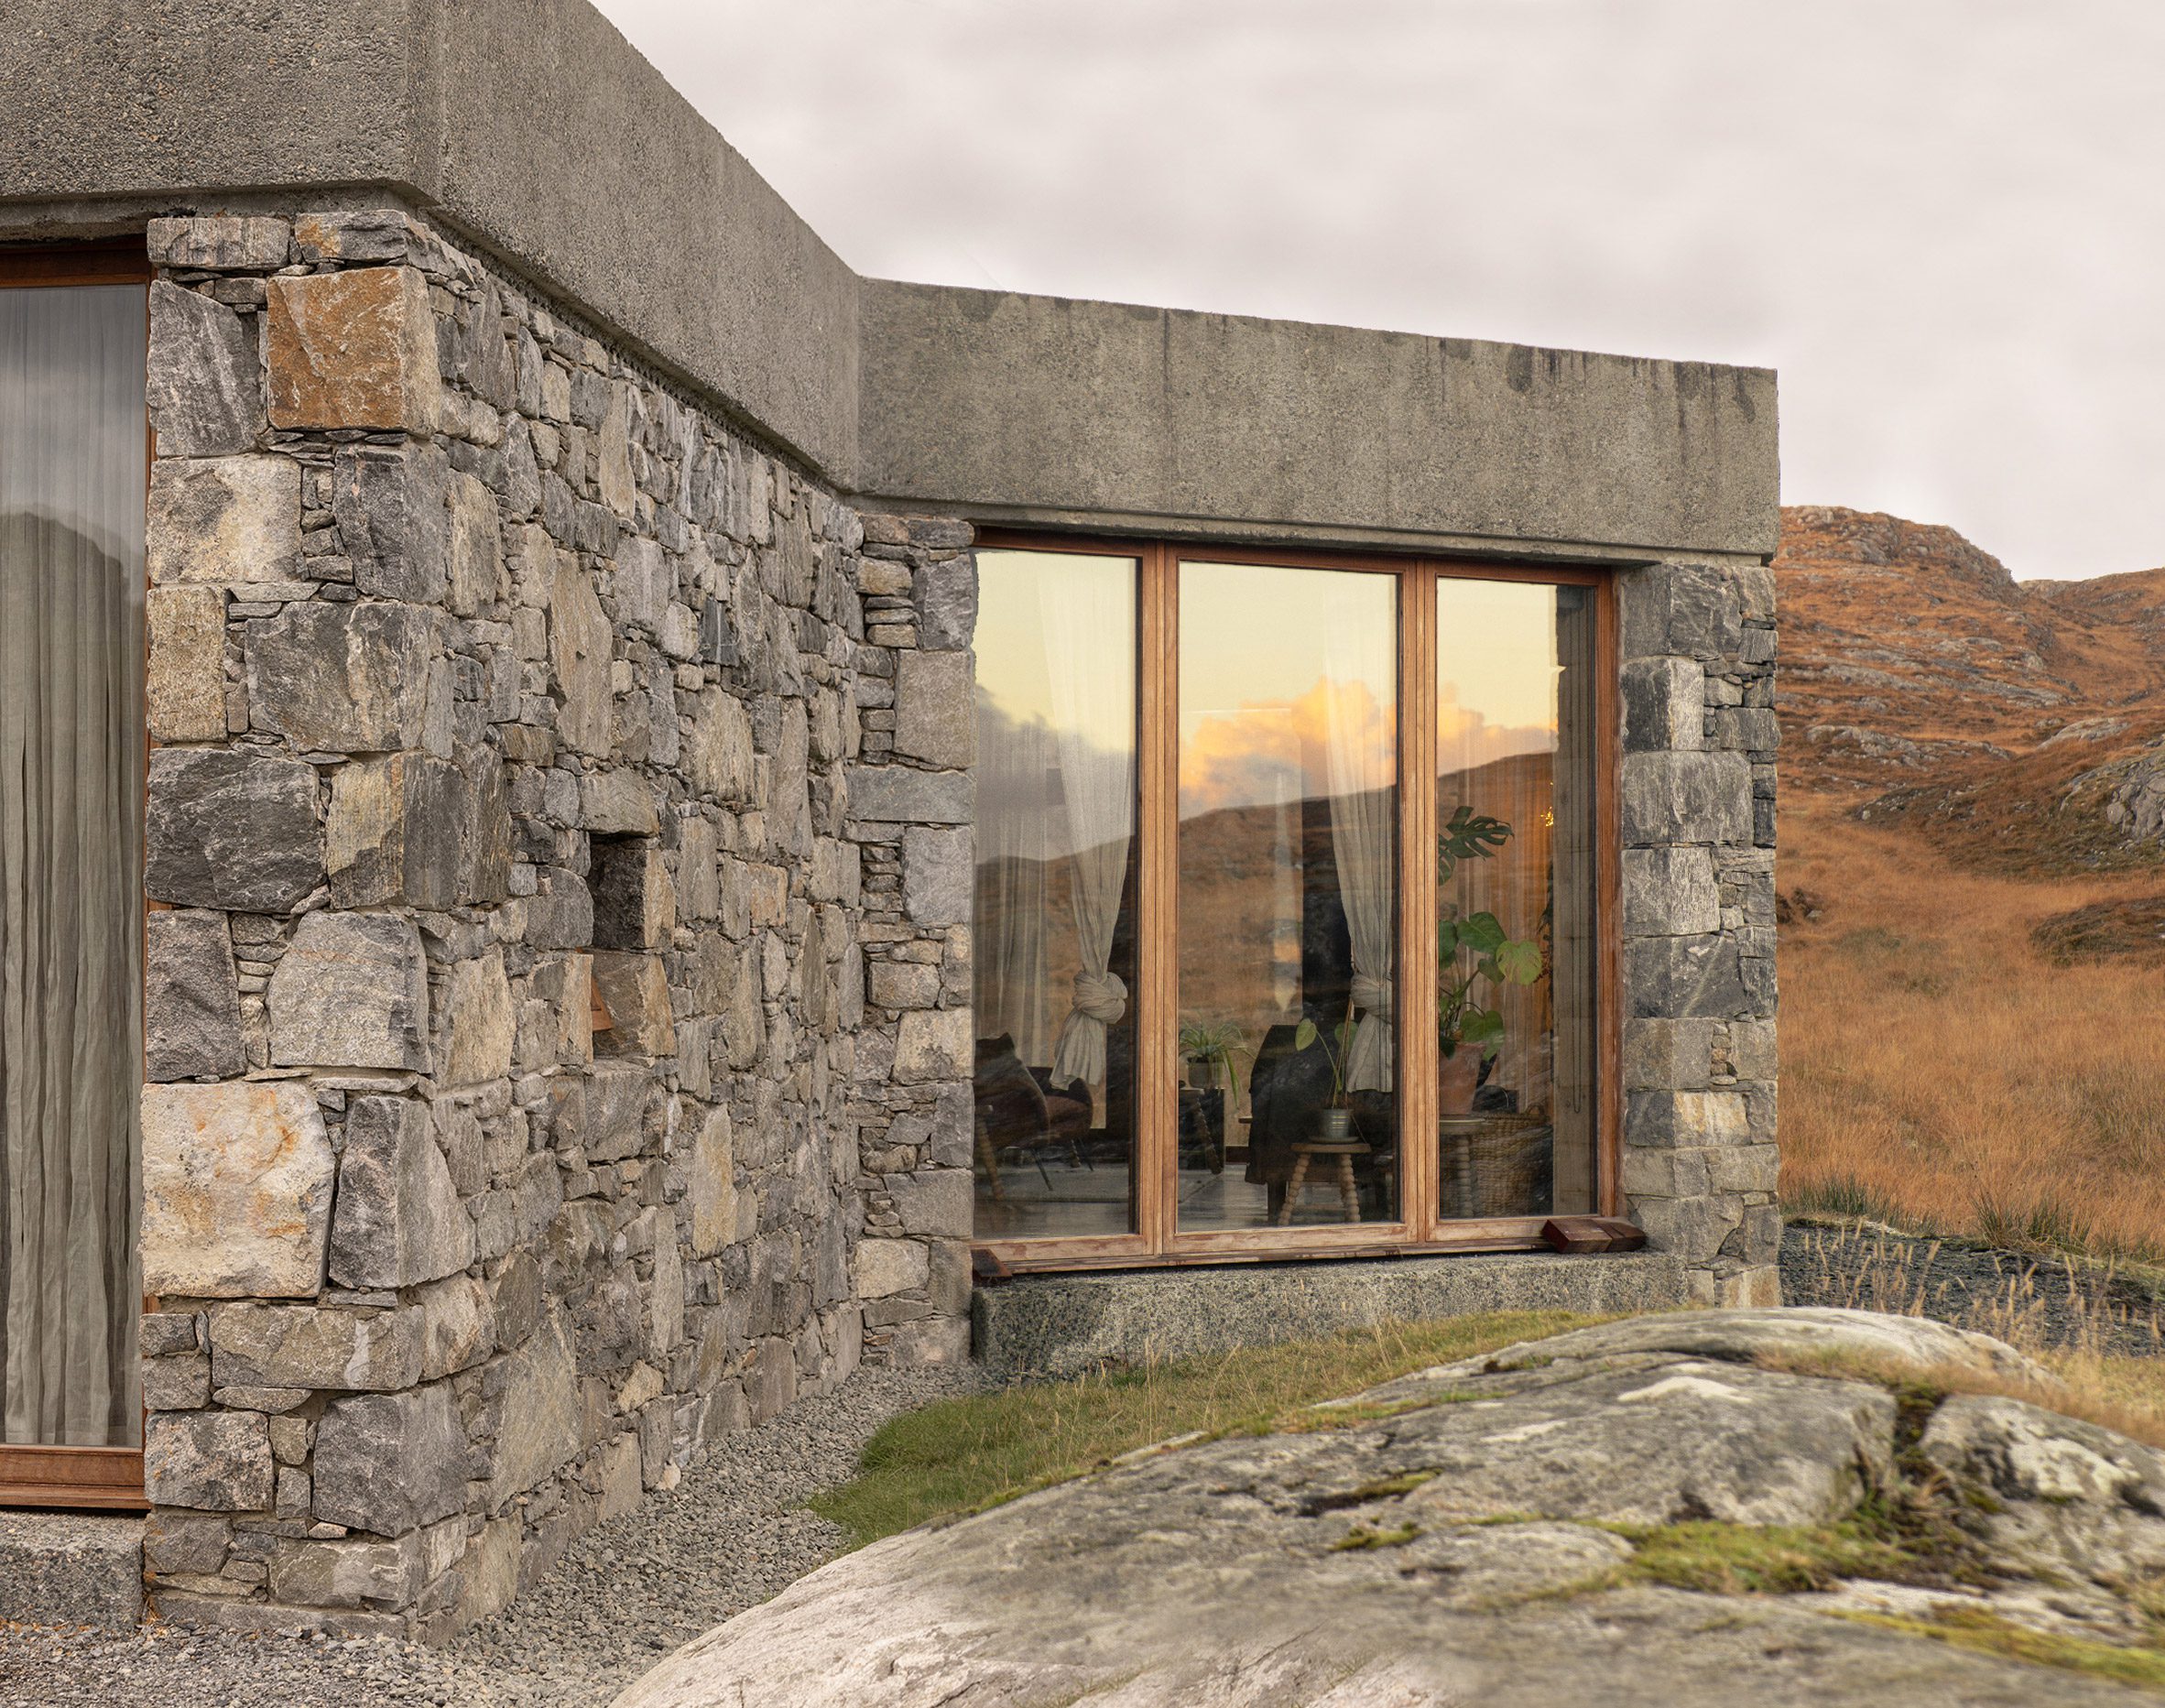 Stone exterior of a house in Scotland by Izat Arundell